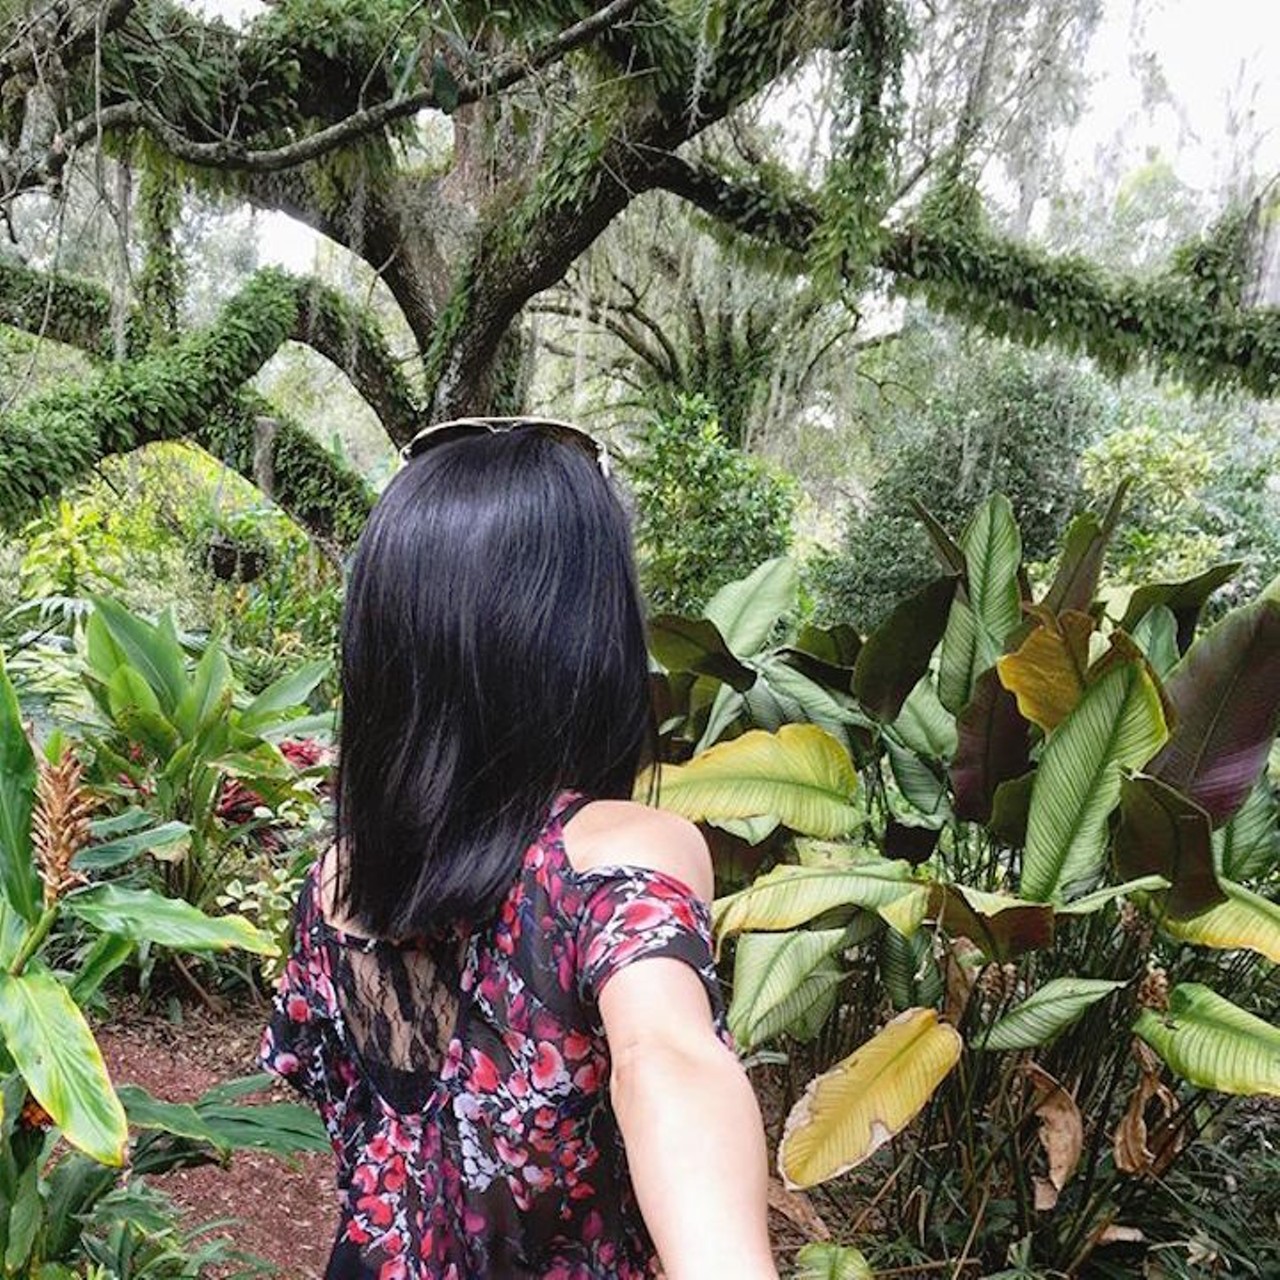 19. While exploring Harry P. Leu Gardens
There's nearly 50 acres of potentially great makeout zones in this urban garden. 
Photo via helenh0/Instagram